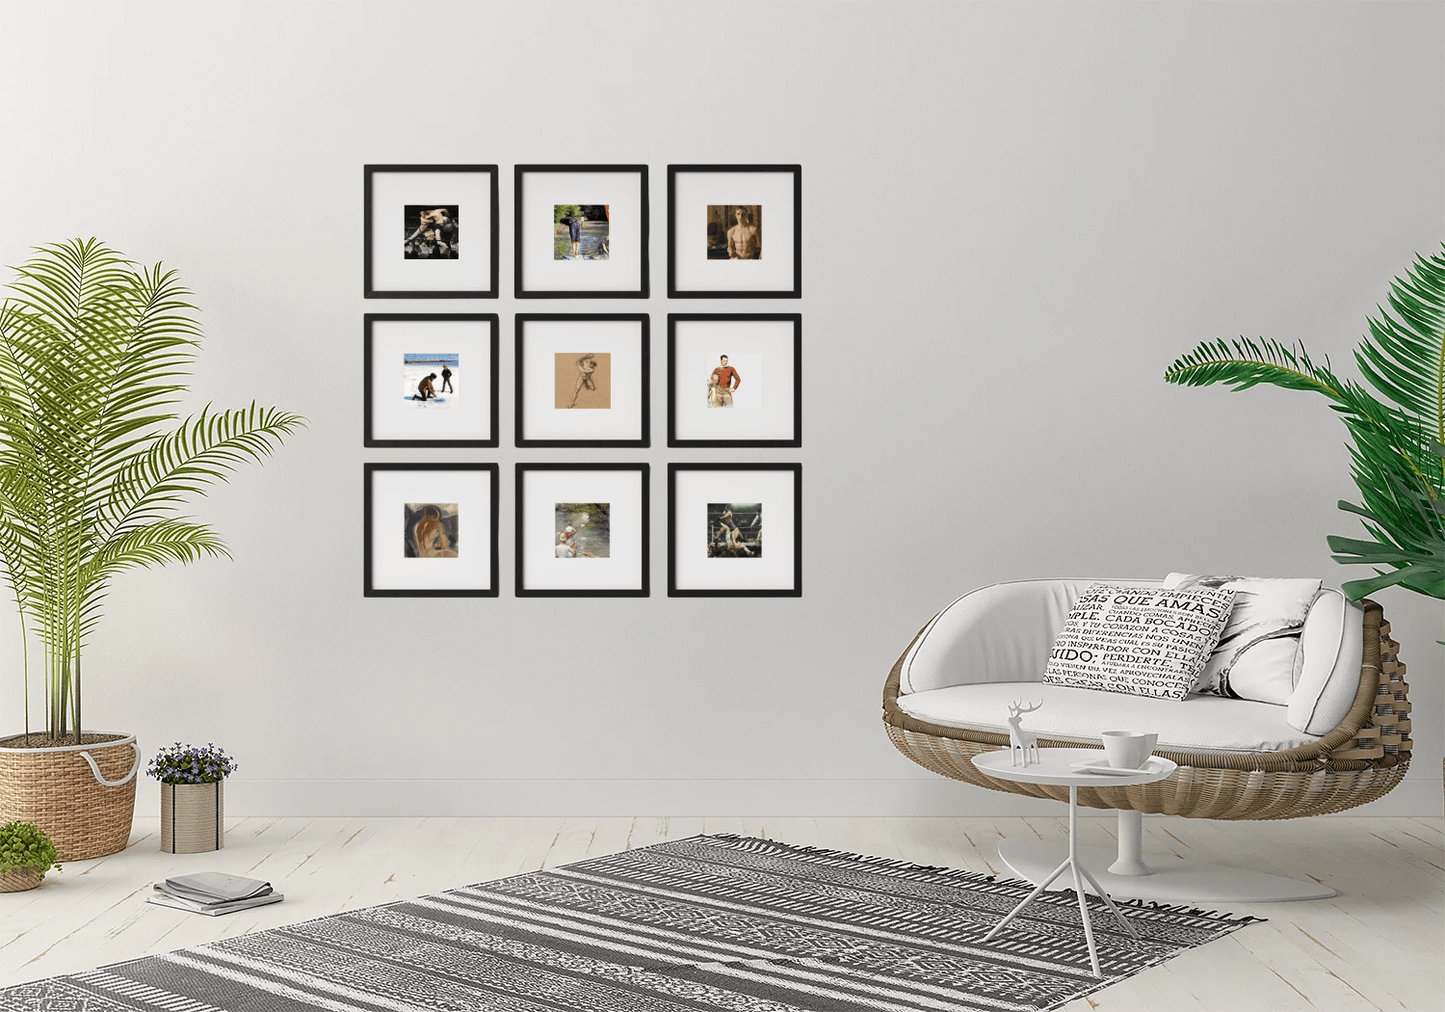 fragileHEIRLOOMS Sports and Pastimes; Showcase of Nine Prints in 11"x11" Frames, matted